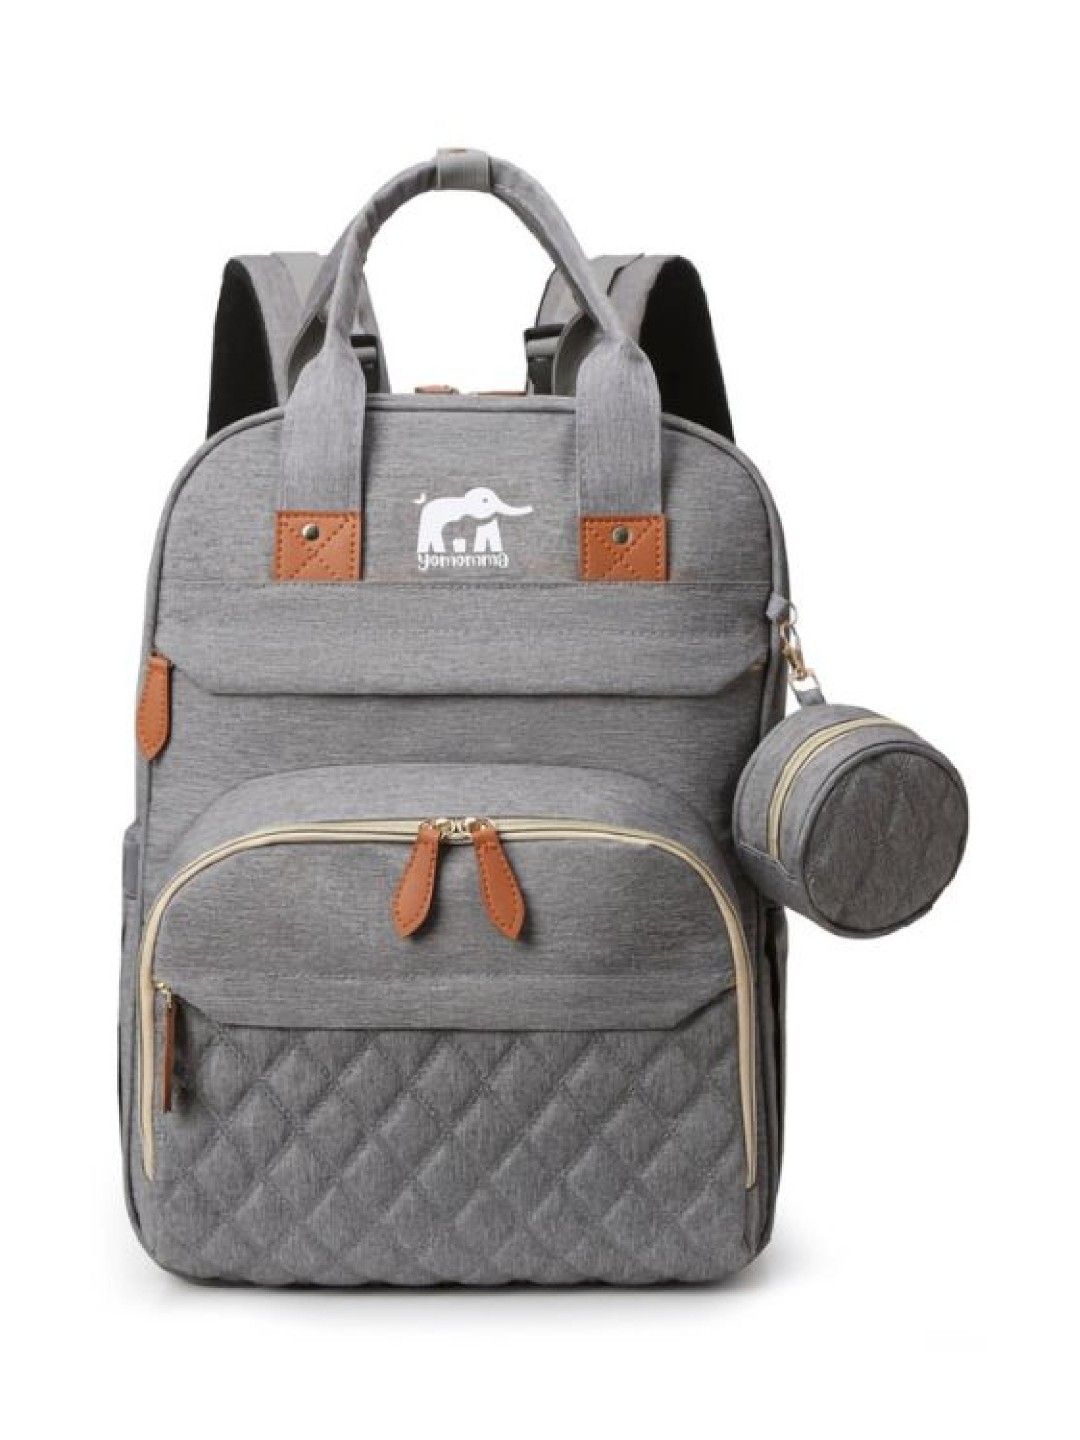 Yomomma Momma Carry-All Bag